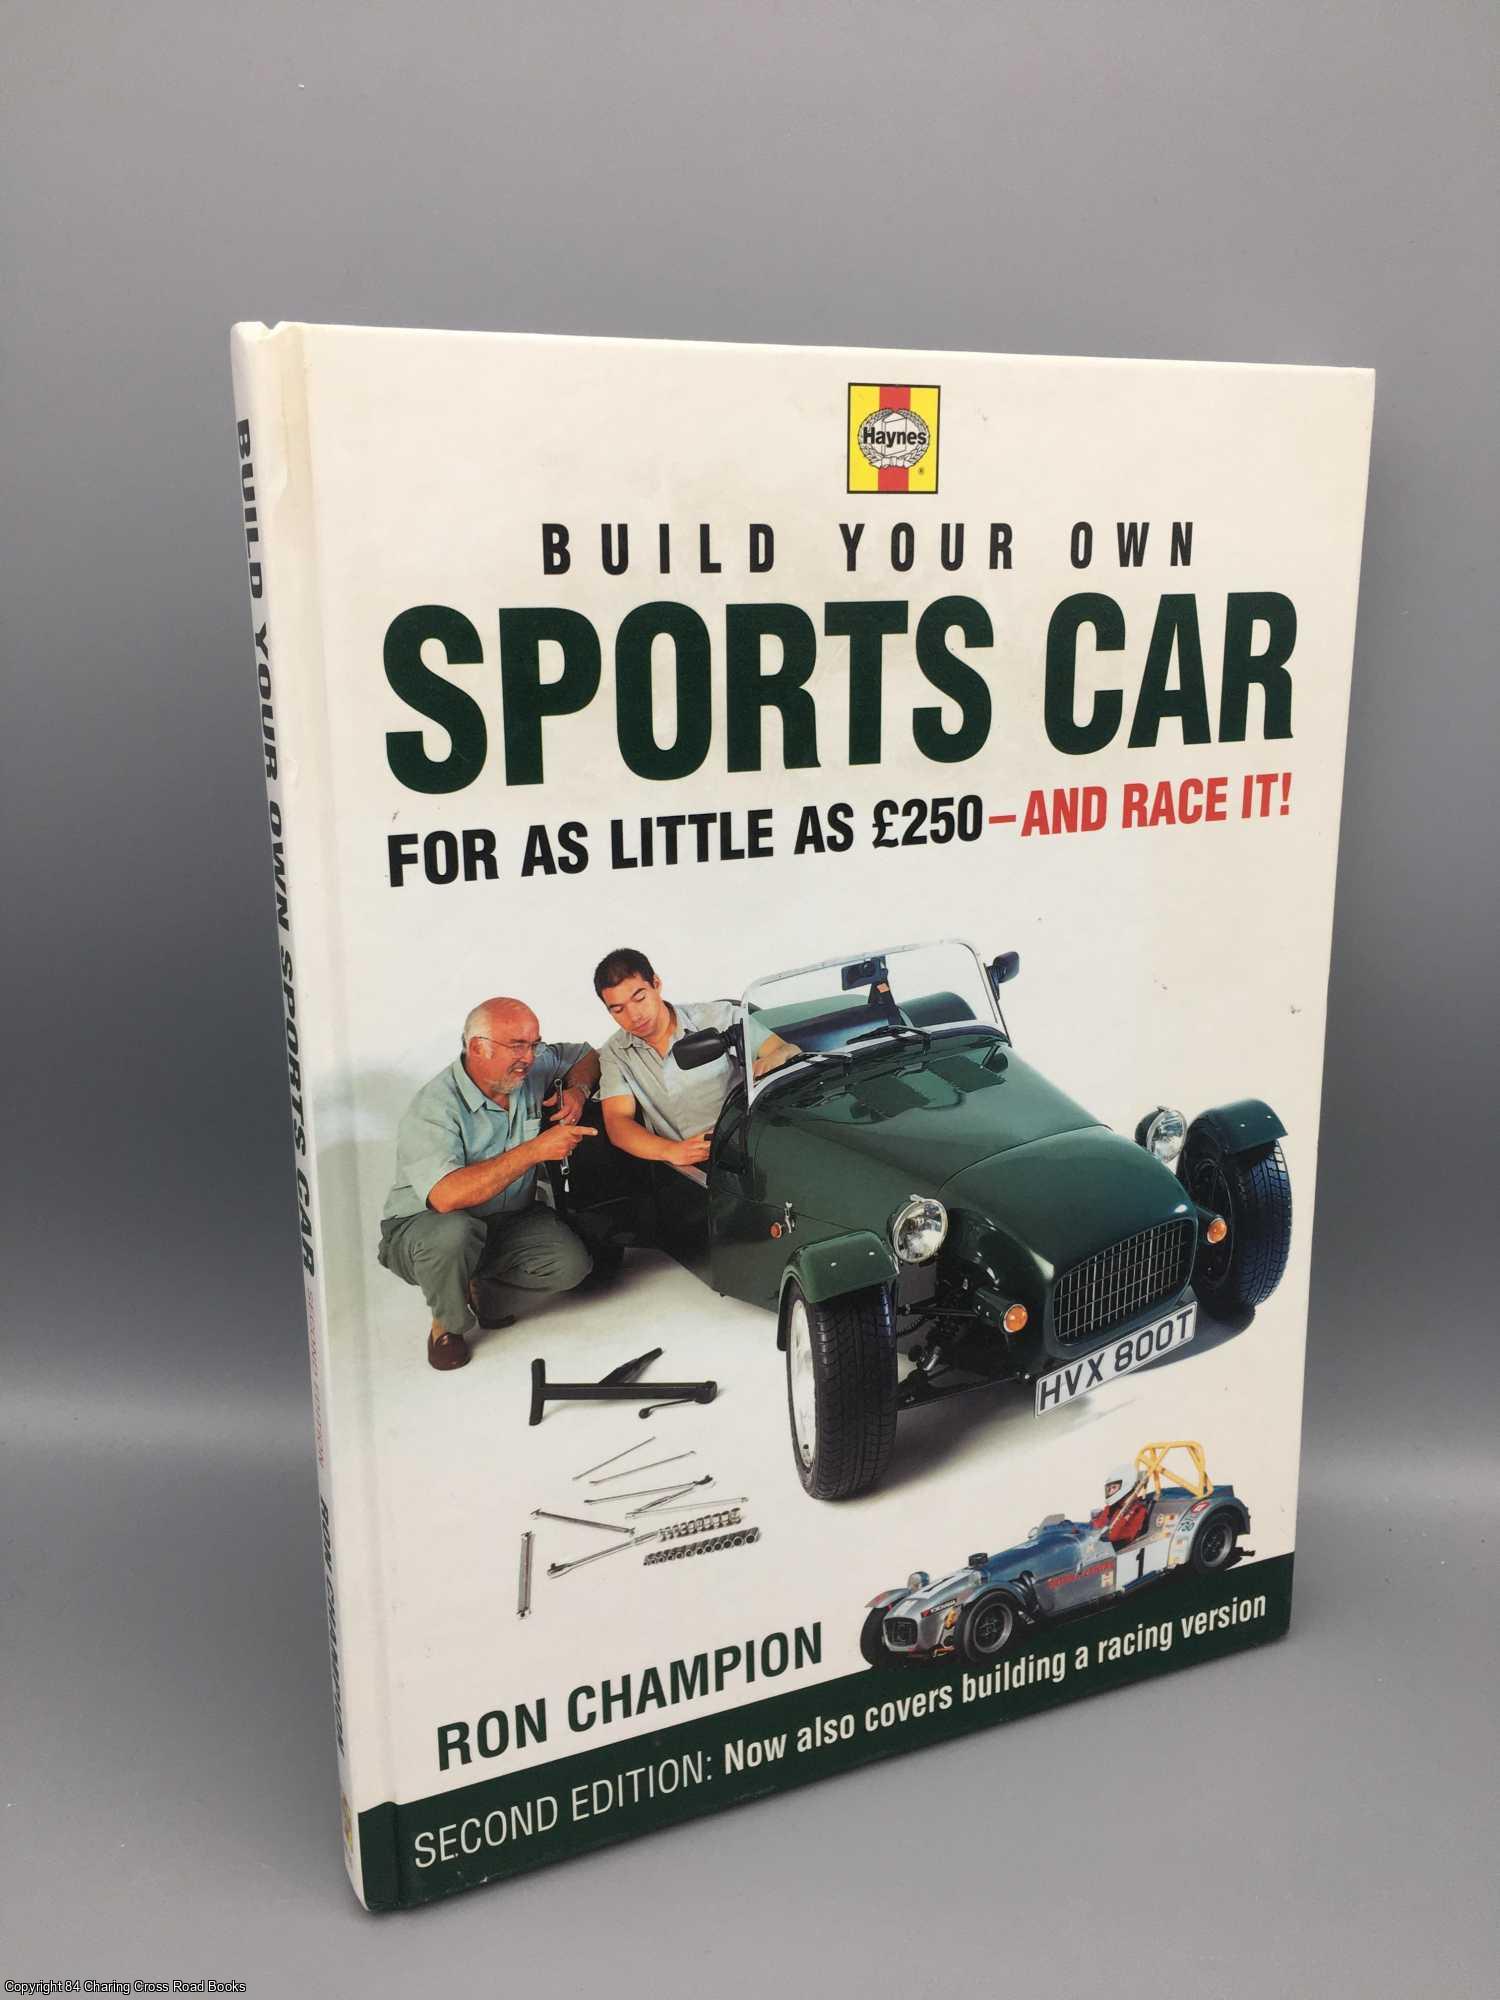 Champion, Ron - Build Your Own Sports Car for as Little as 250 Pounds: And Race it!